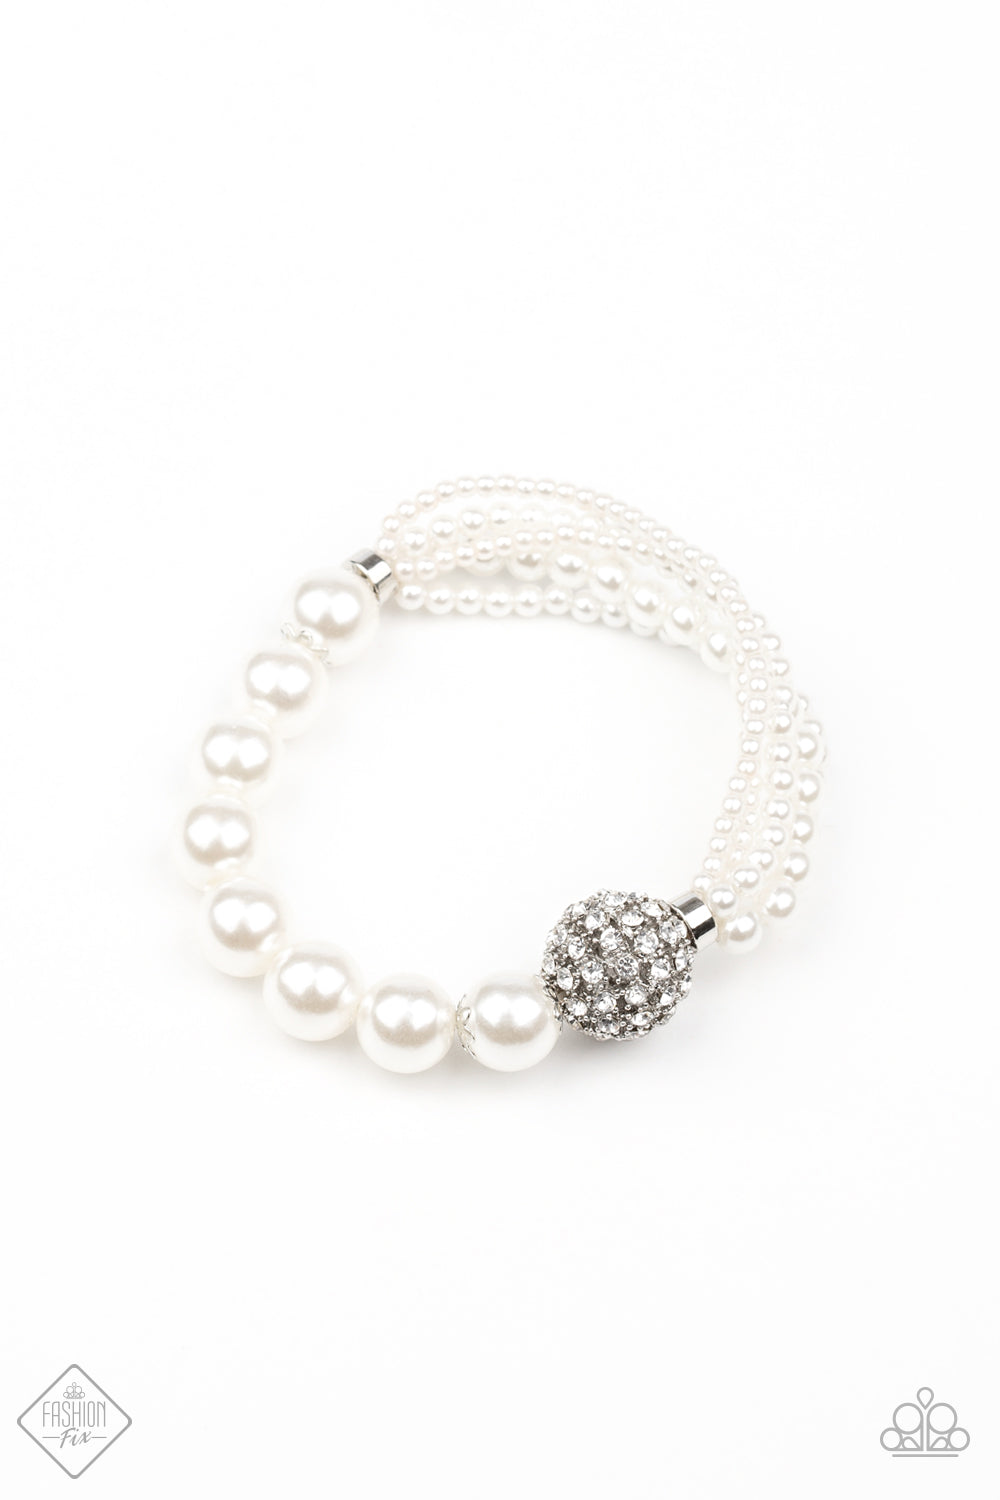 Show Them The DOOR White Bracelet - Paparazzi Accessories Item #B335 Featuring comfortable stretchy bands, a white rhinestone-encrusted silver bead connects strands of mismatched white pearls and a single strand of classic white pearls around the wrist in a timeless twist. All Paparazzi Accessories are lead free and nickel free!  Sold as one individual bracelet.